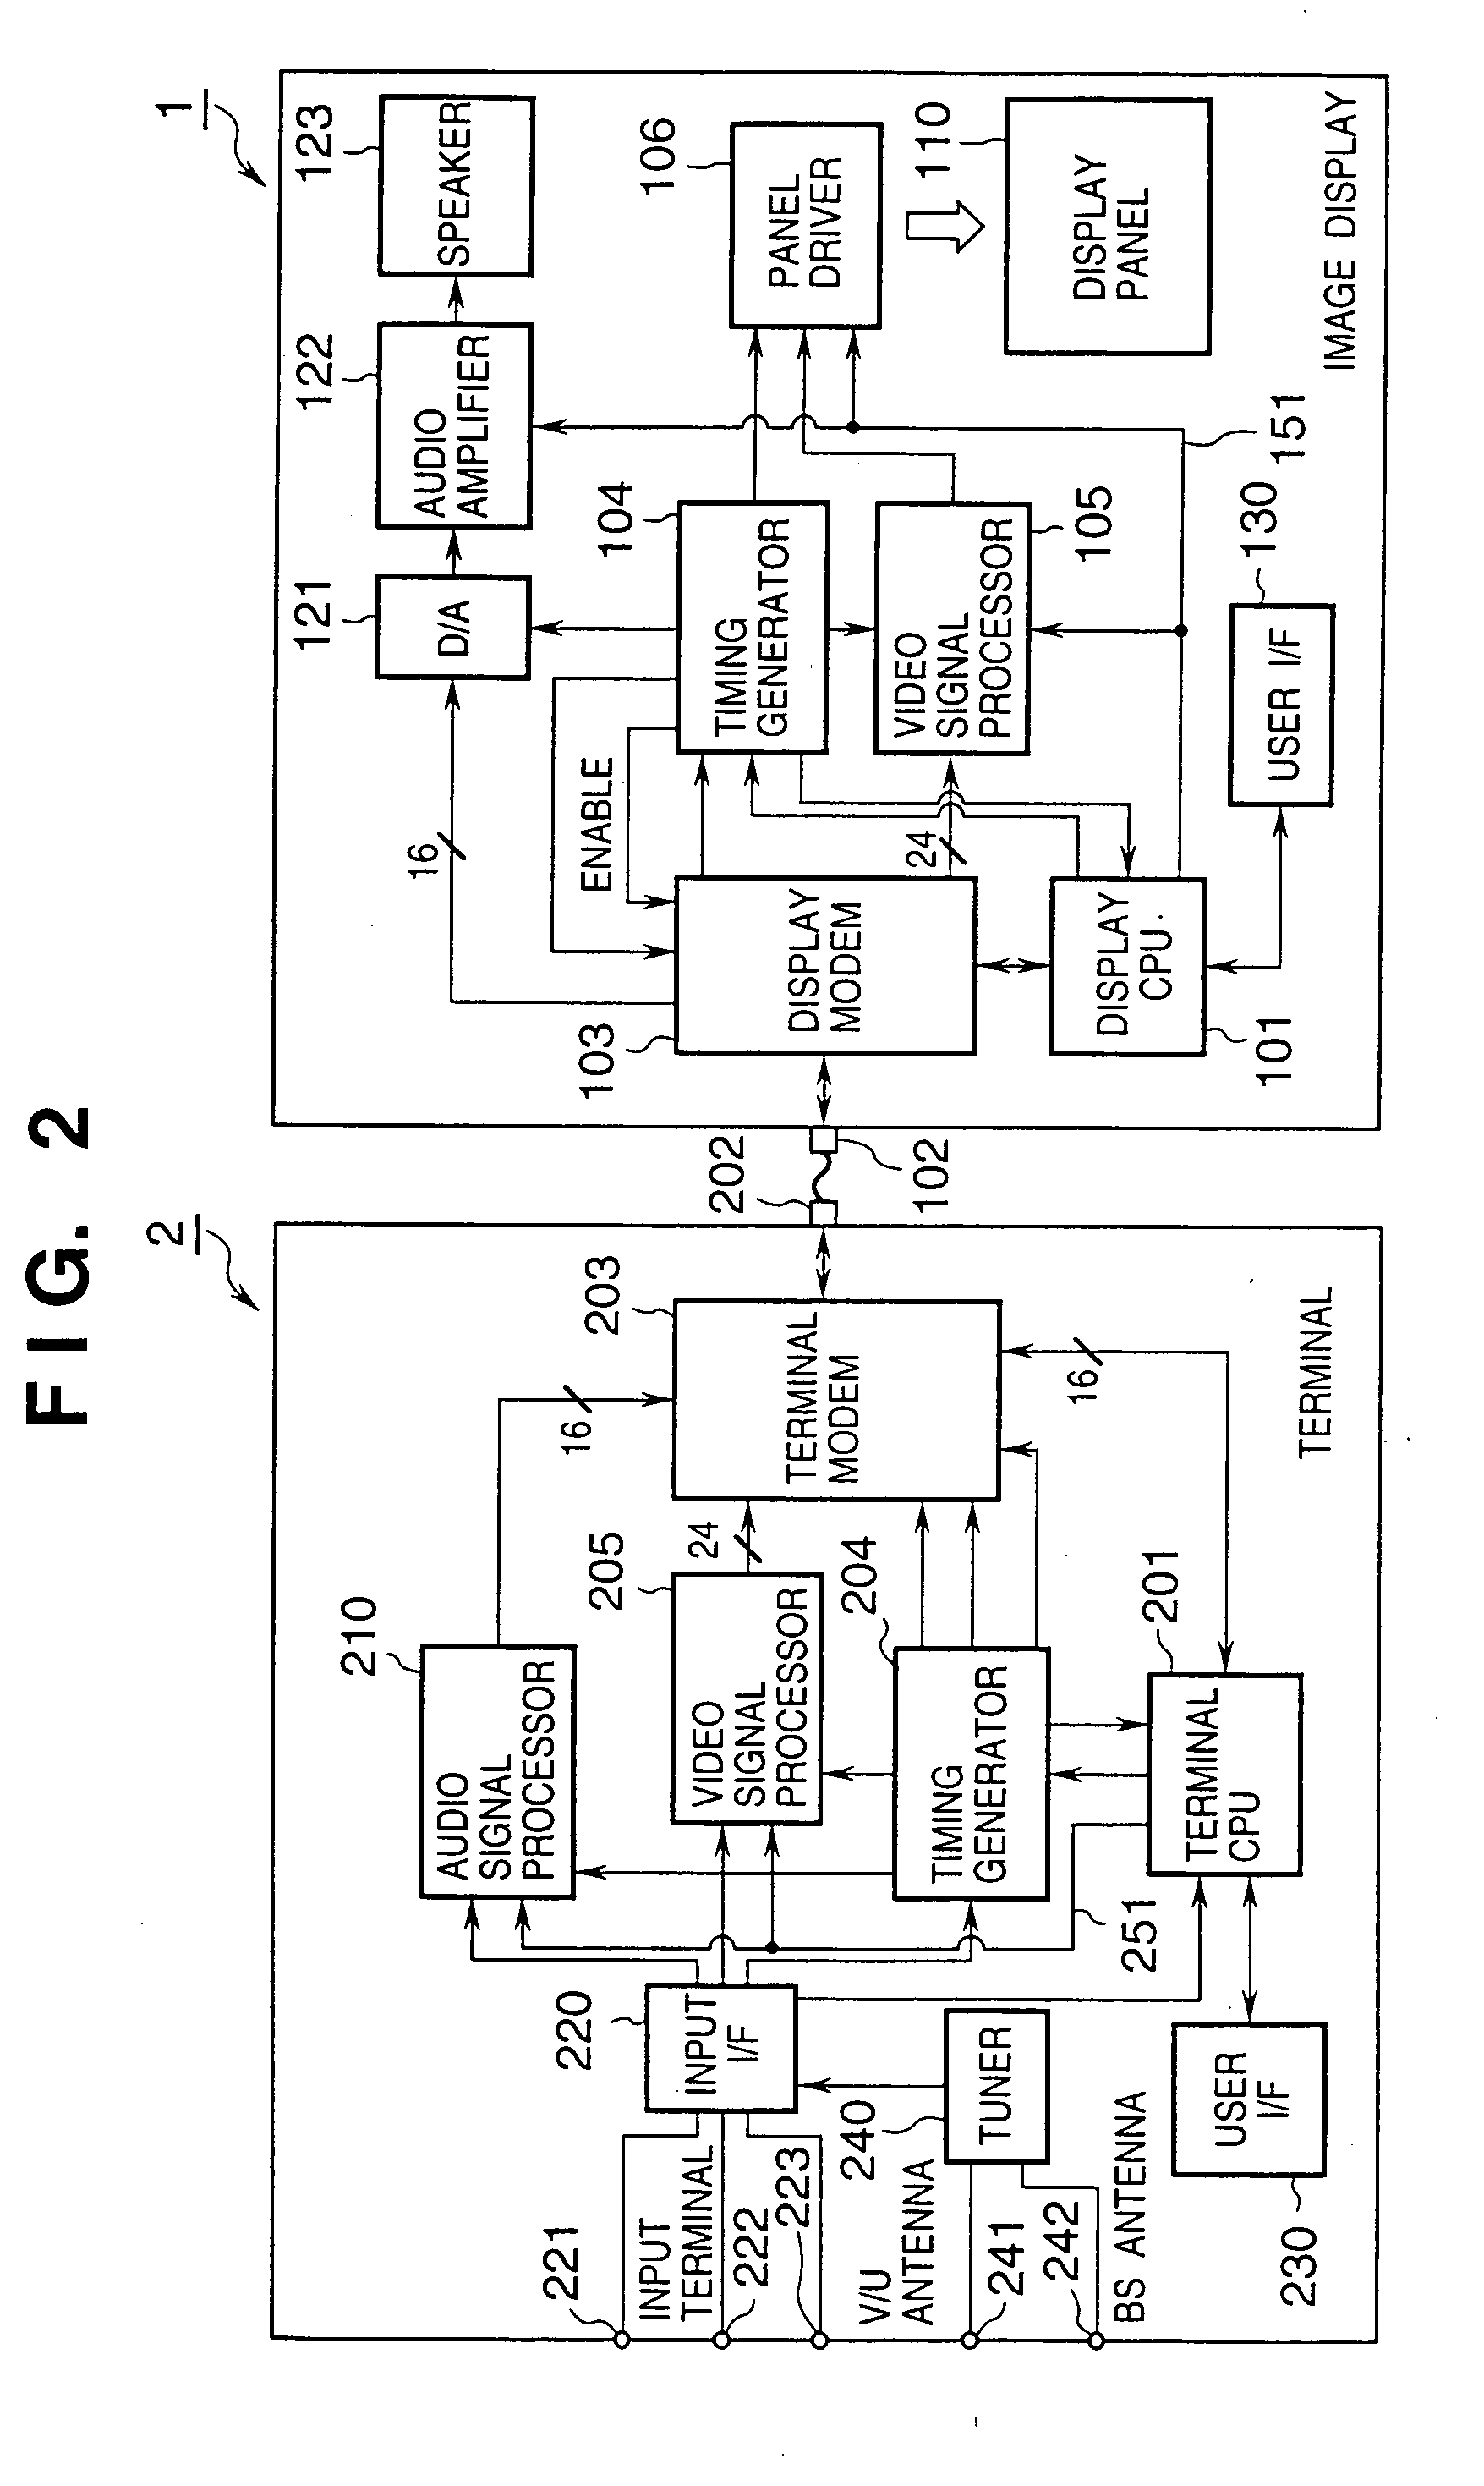 Image display control system and image display system control method